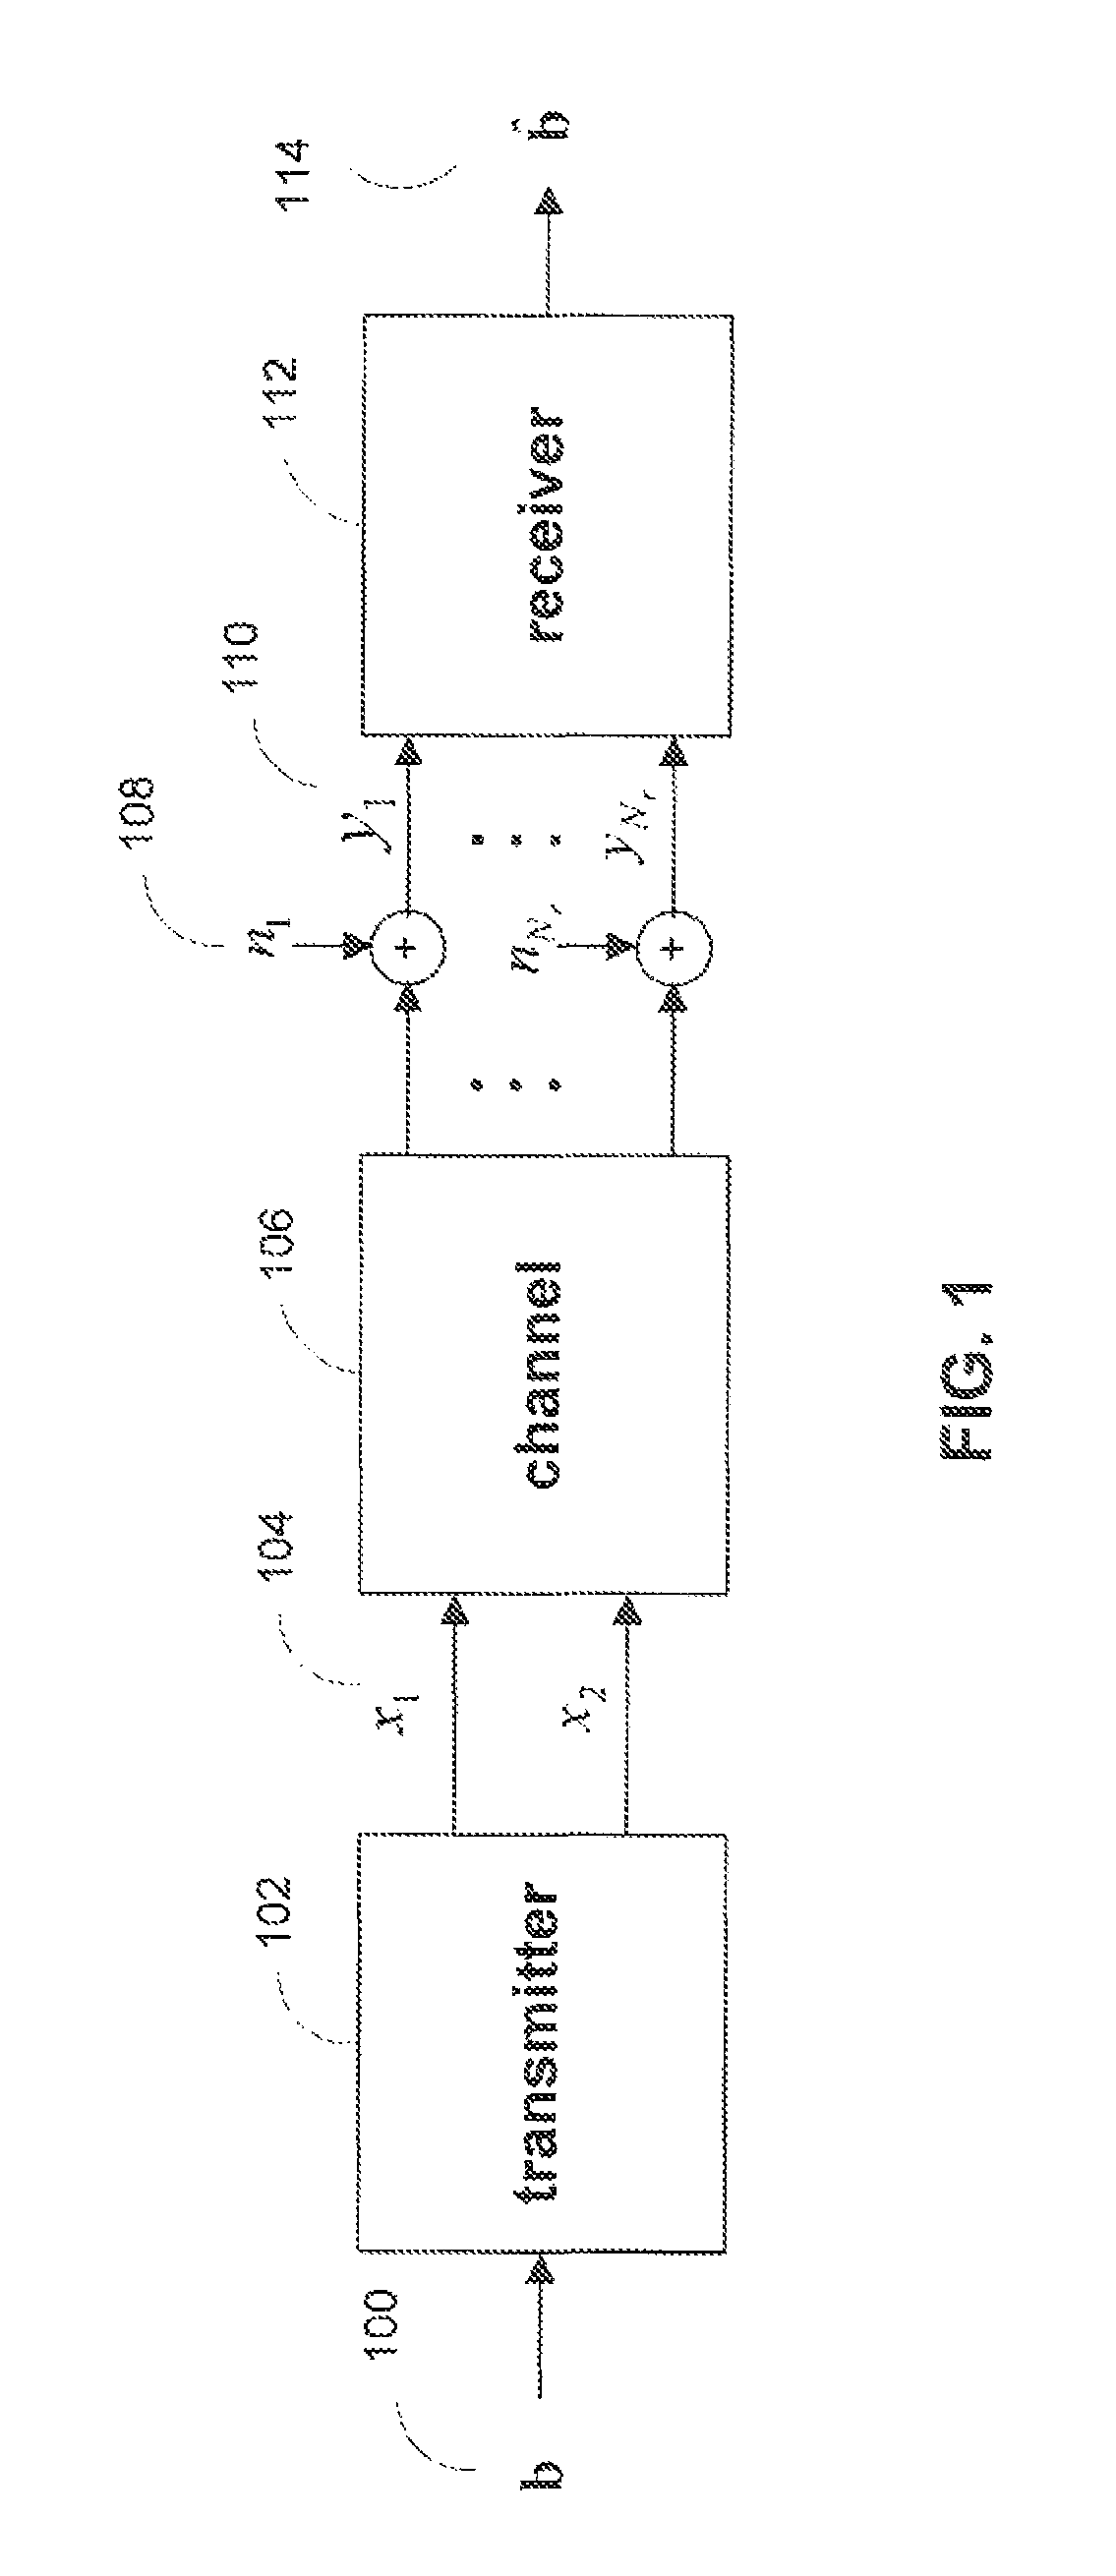 Decoding method for Alamouti scheme with HARQ and/or repetition coding